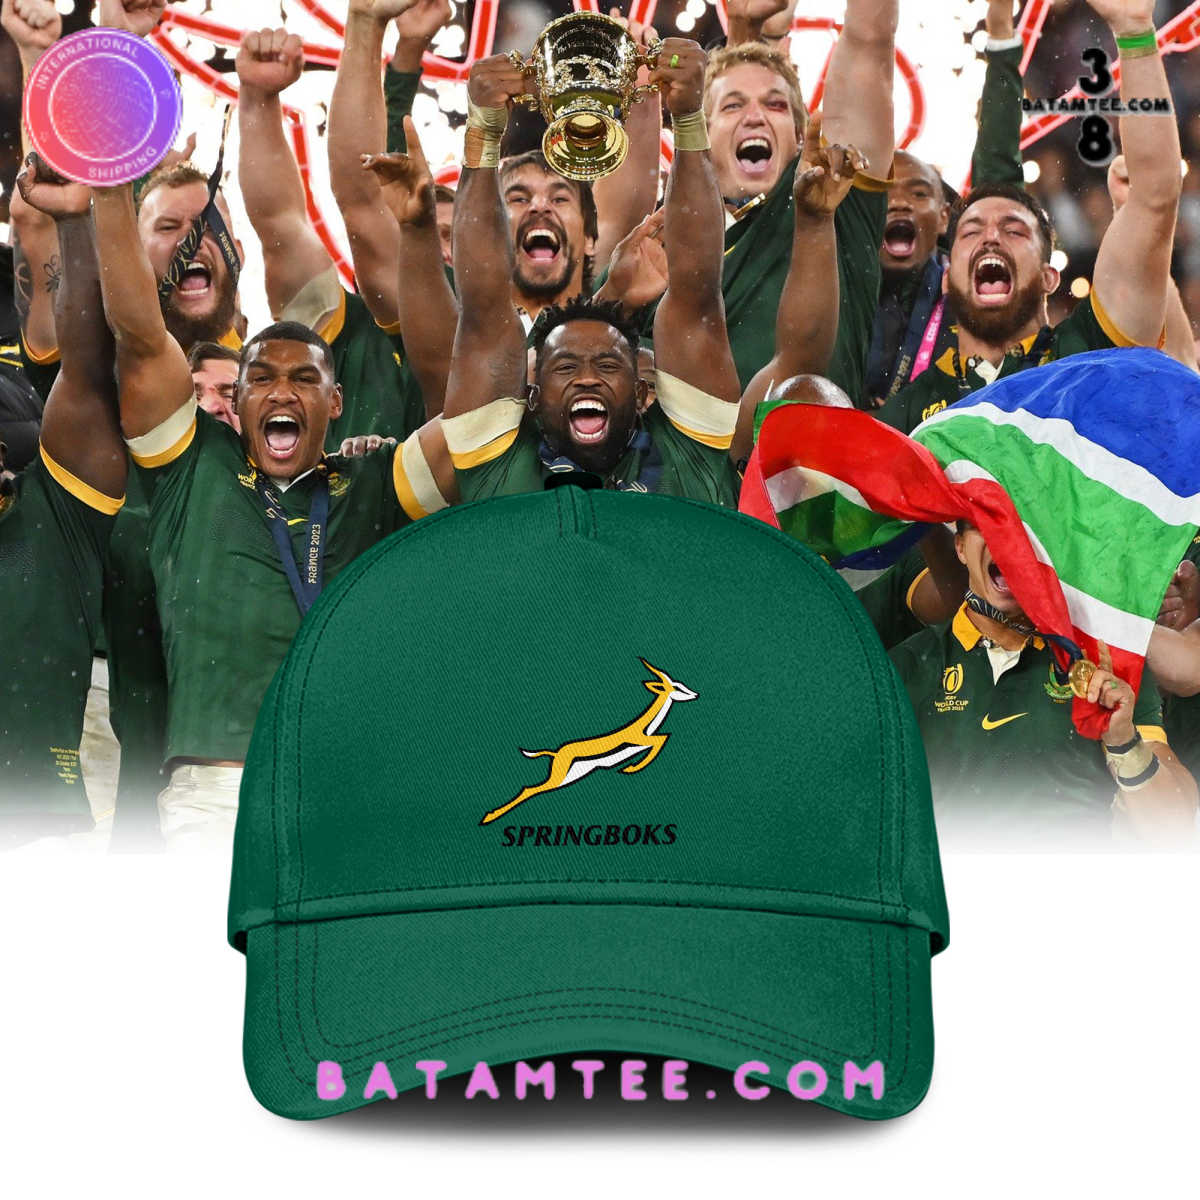 Buy it here: batamtee.com/product/spring…
Selling at only: 28.99
Congrats to the #Springboks for becoming the #RWCChampion2023! South Africa's victory is truly historic. Loving the new #ClassicCap too! 🏆🇿🇦 #RugbyWorldCup #Champions #Proud